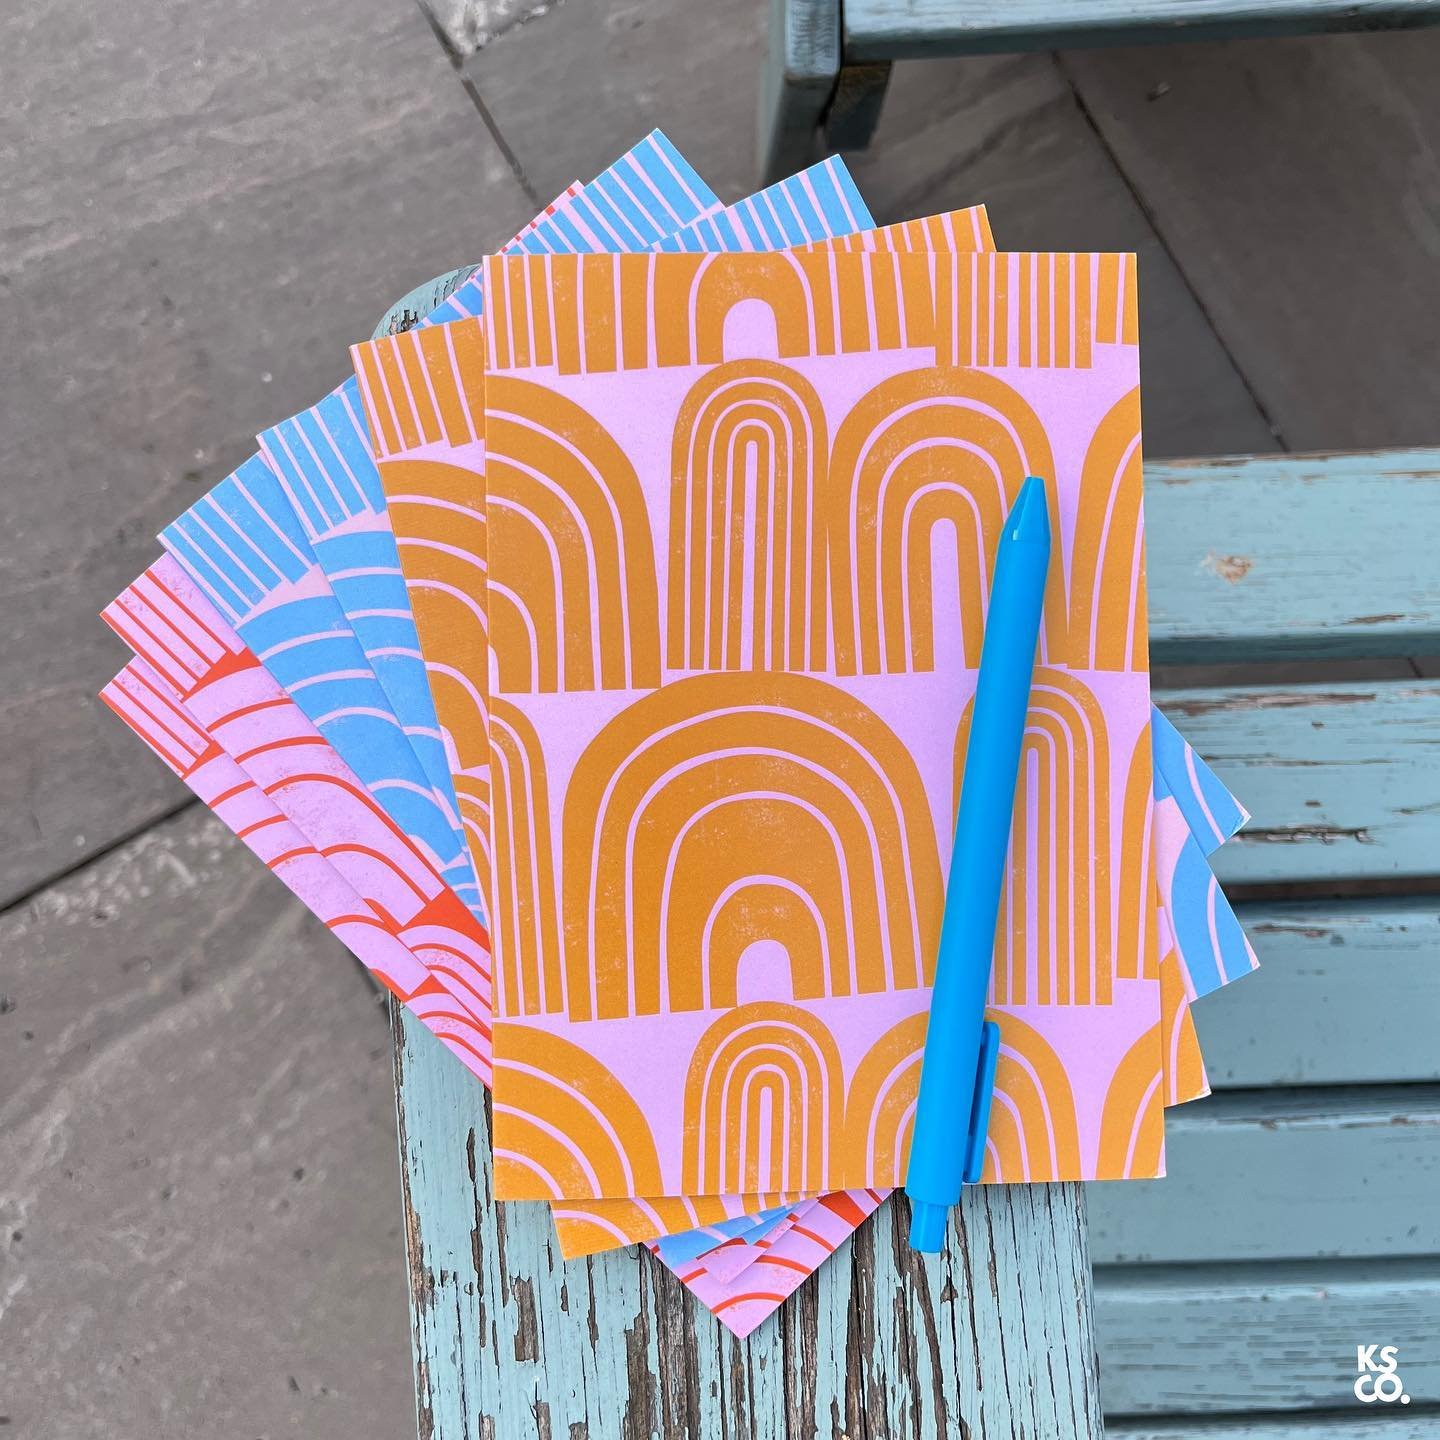 Last day to grab our blank card 6-packs for $8 🏷️ Stock up now! Future you will thank you😉
〰️〰️〰️
Our biggest sale of the year ends tomorrow!
〰️〰️〰️
#katesmithco #makinghumanssmile #greetingcards #stationery #sale